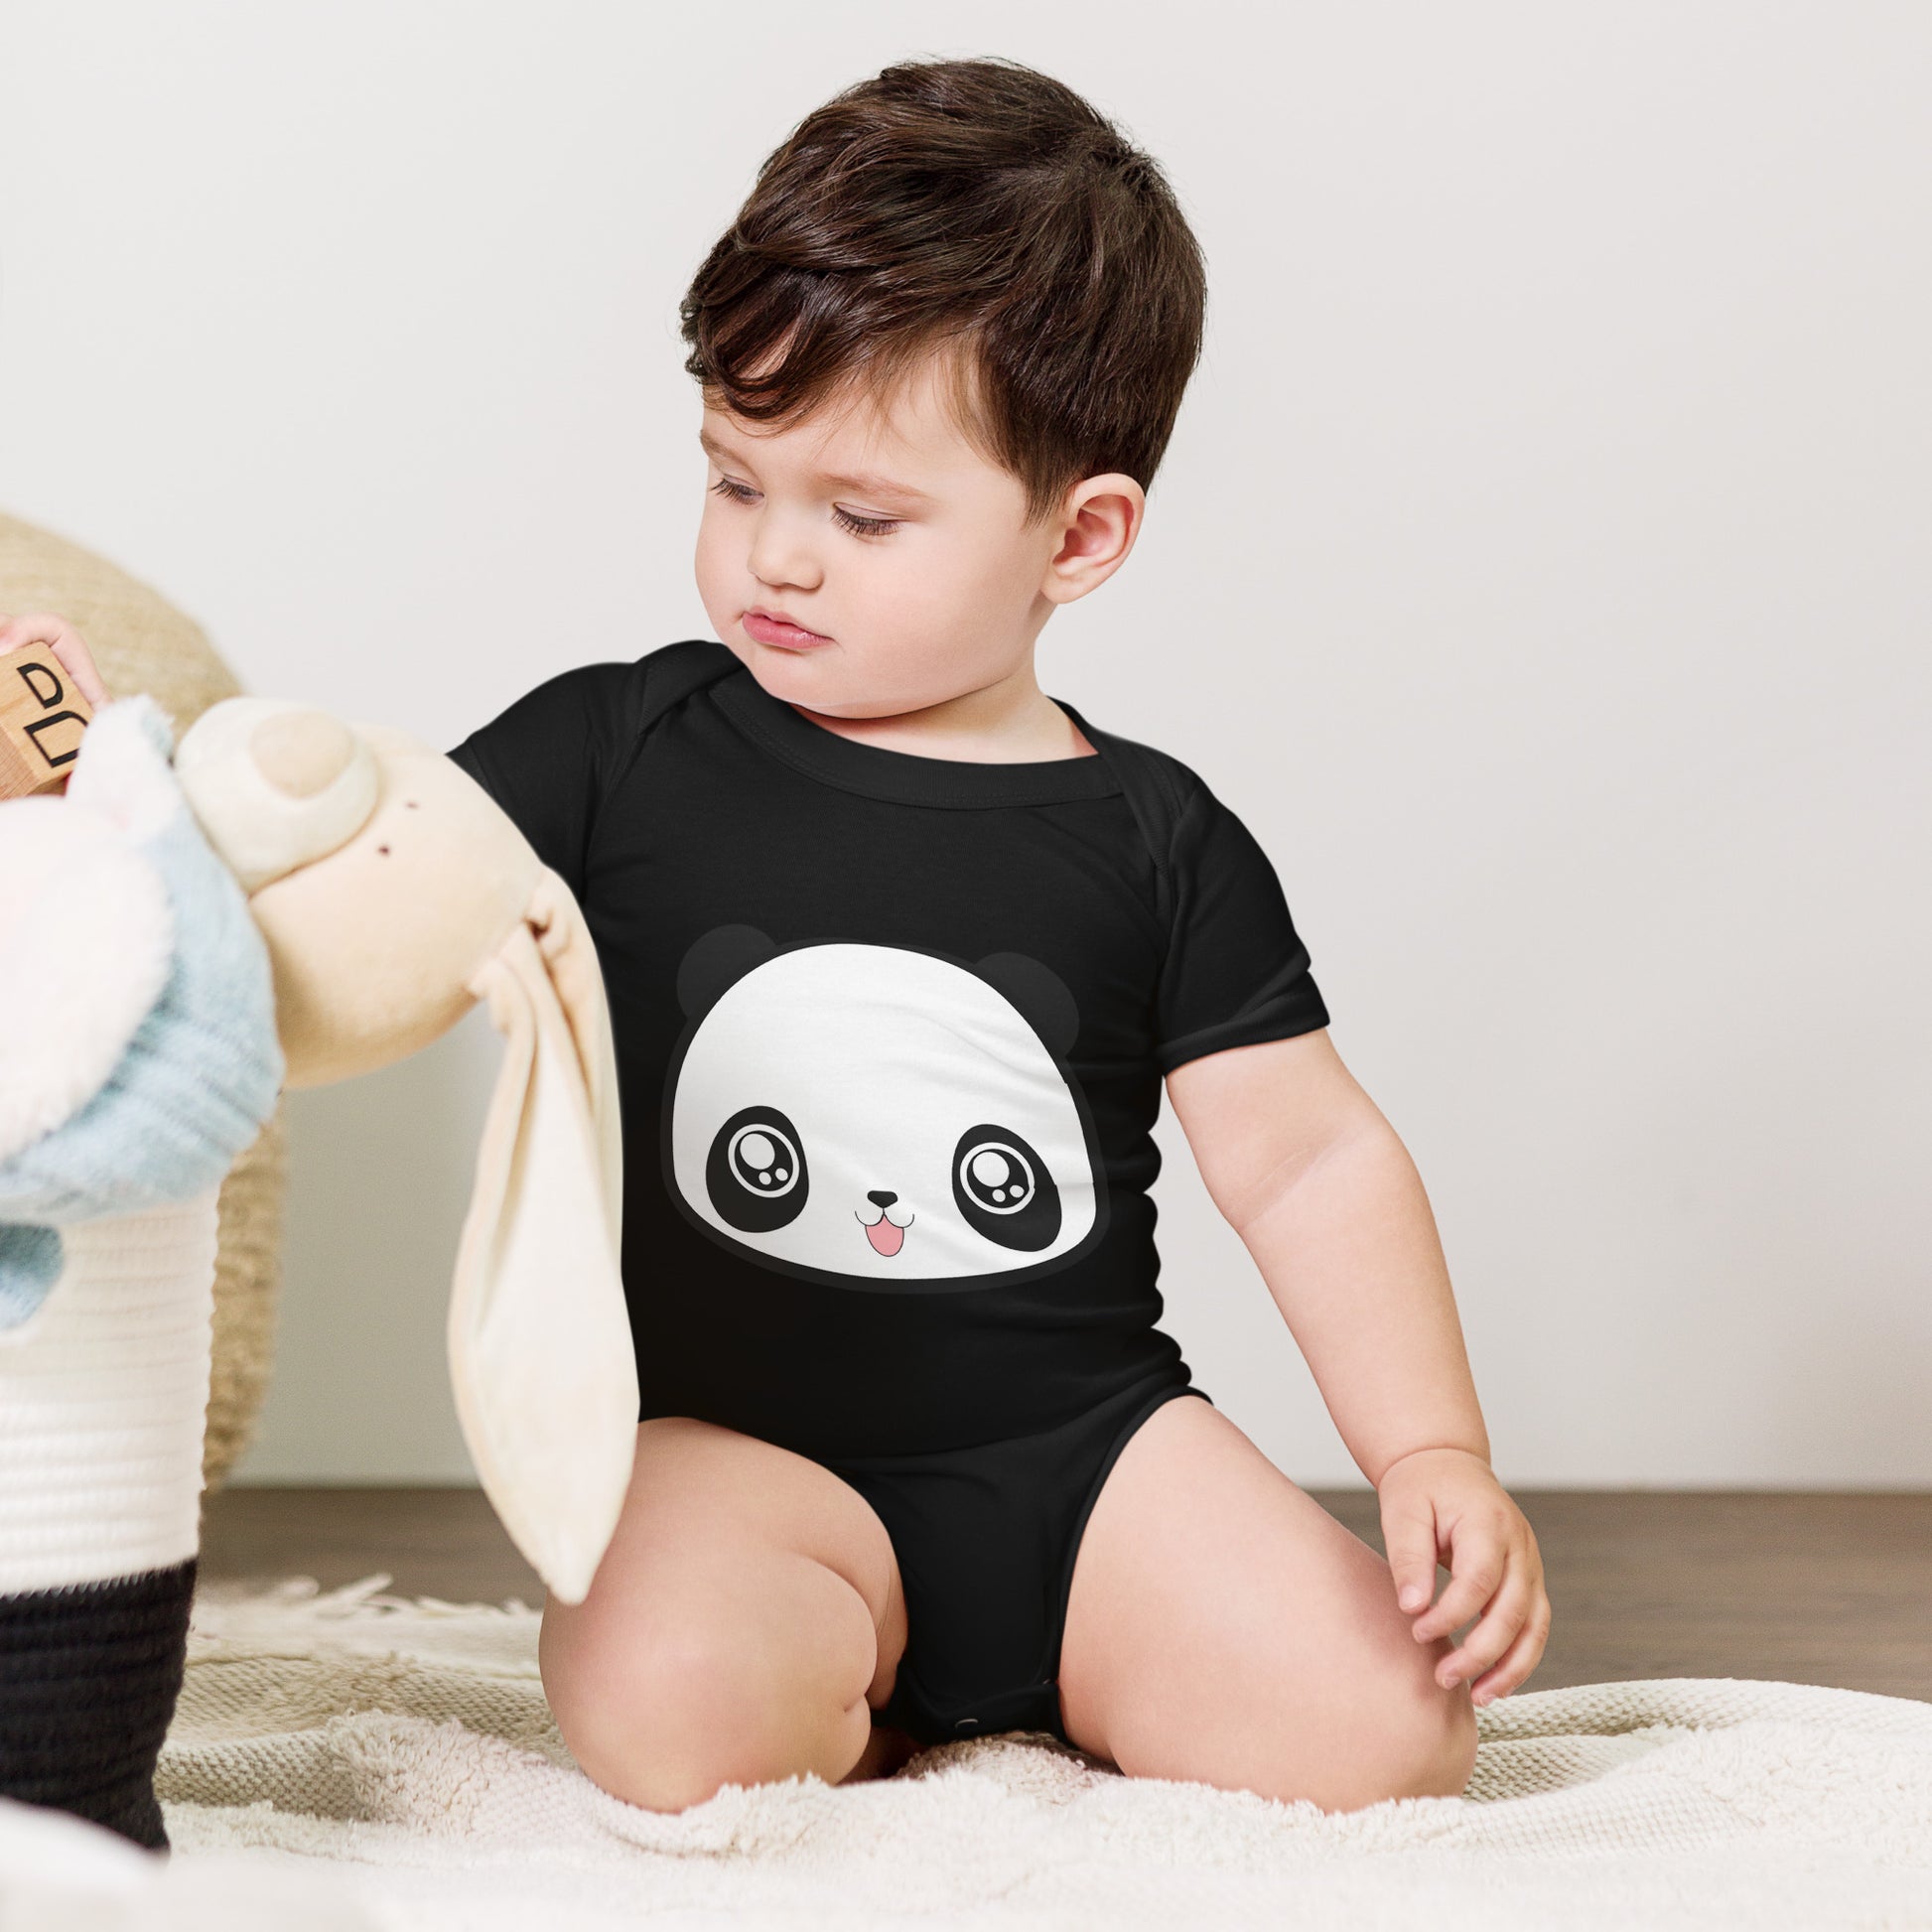 Baby with black babysuit with print of panda head